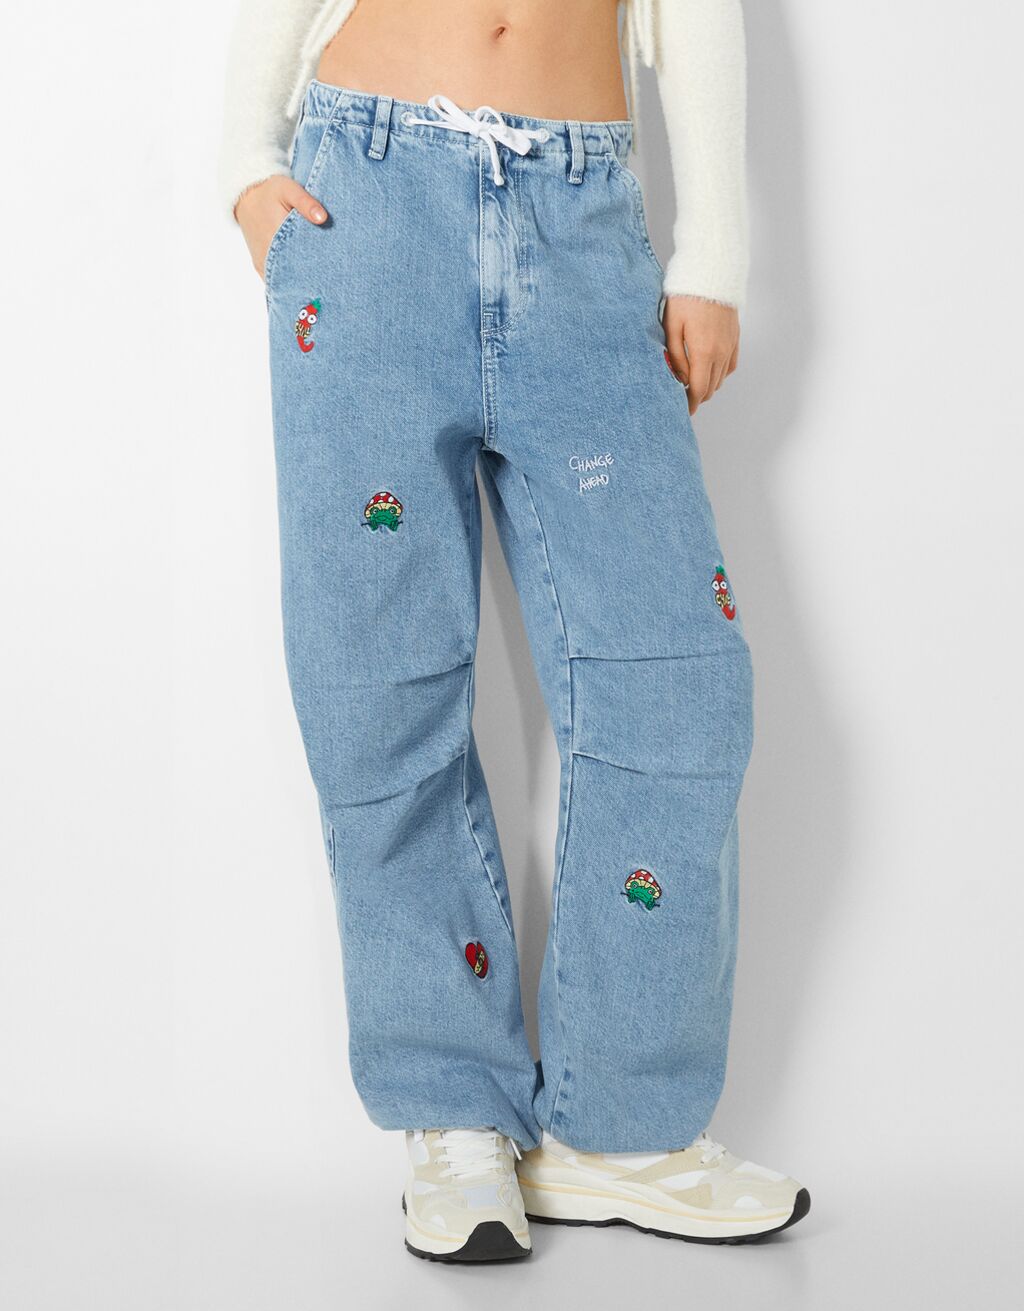 Embroidered parachute jeans